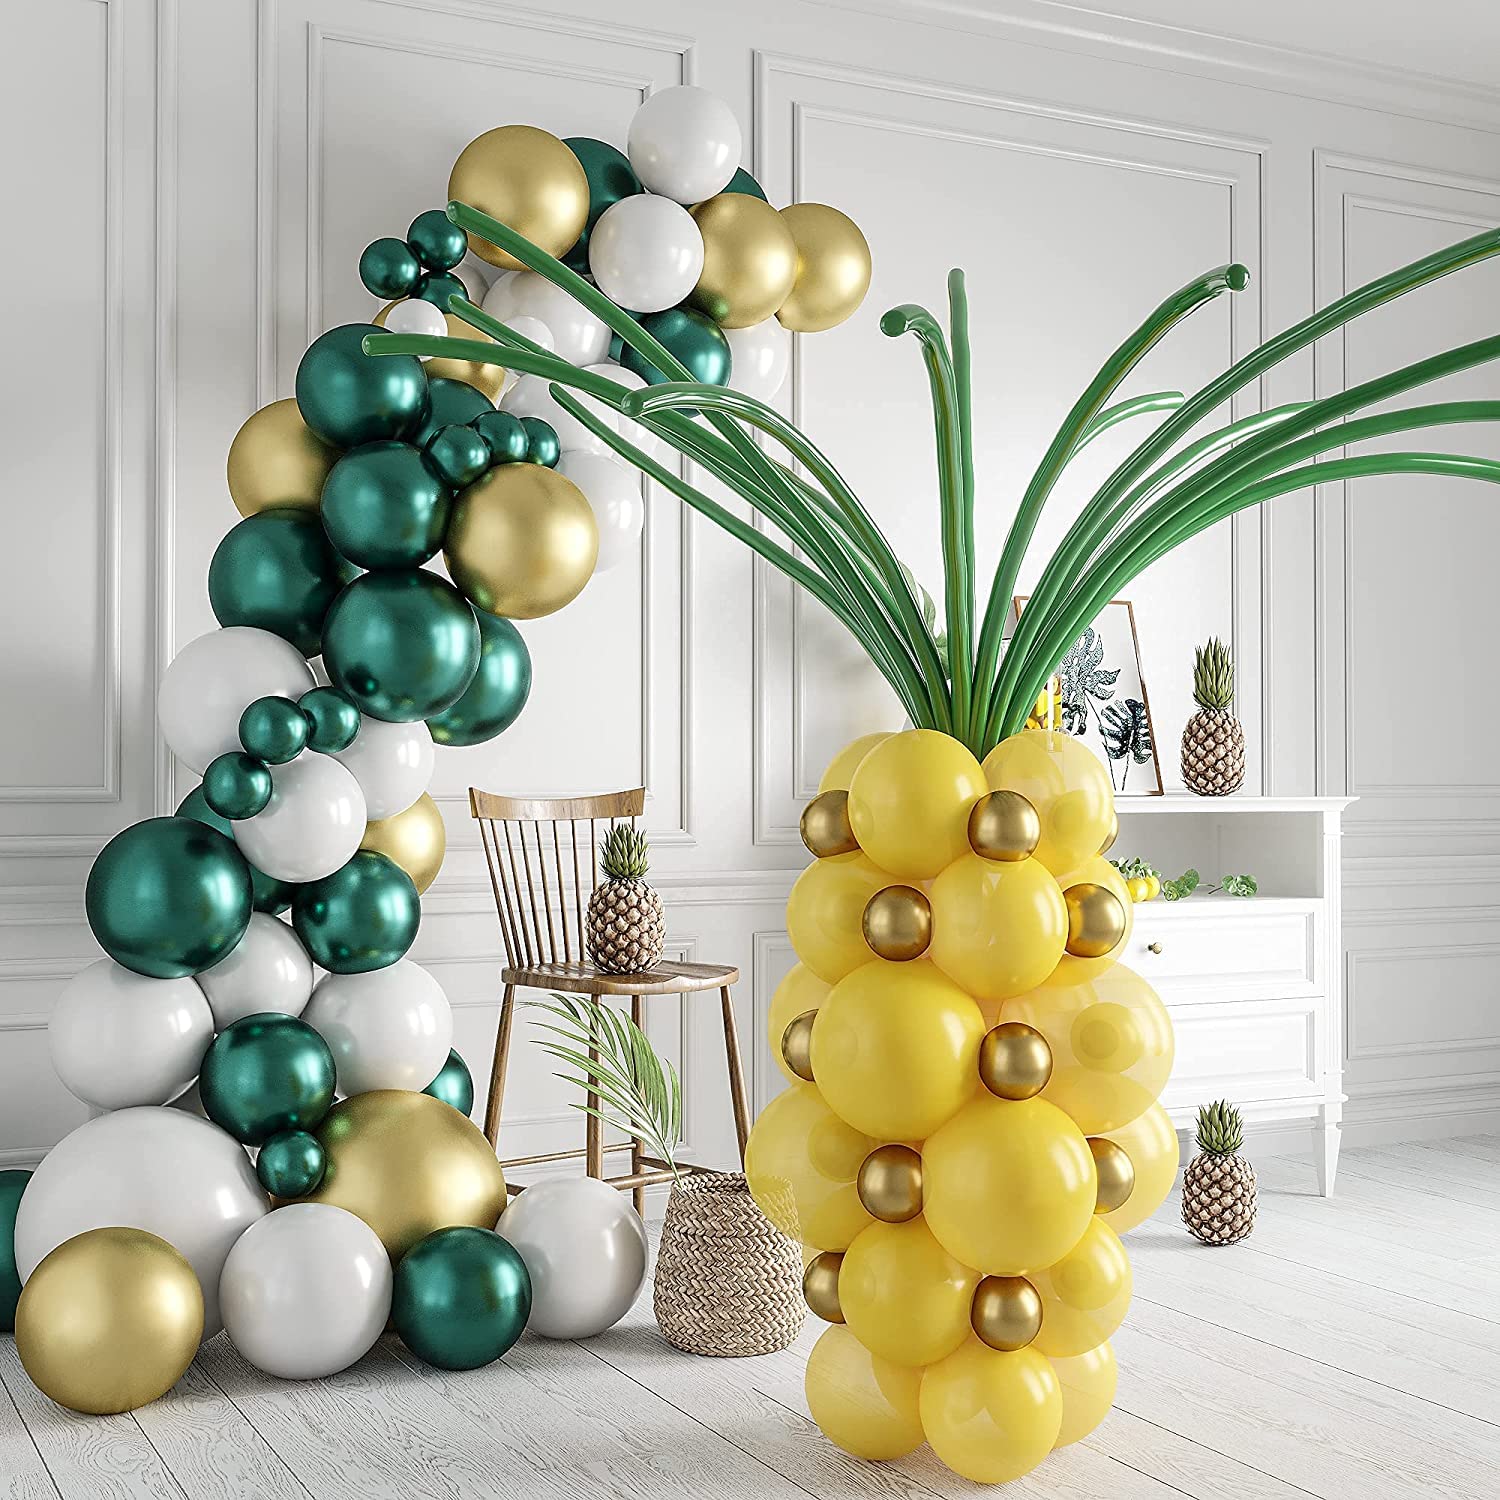 HOUSE OF PARTY Pineapple Balloons for Tropical Balloon Arch Kit 64 Pcs - 12,10,5 Inch Yellow, Gold and Green Summer Balloon Garland | Pineapple Decorations for Luau, Aloha, Hawaiian, Pool, Beach Party